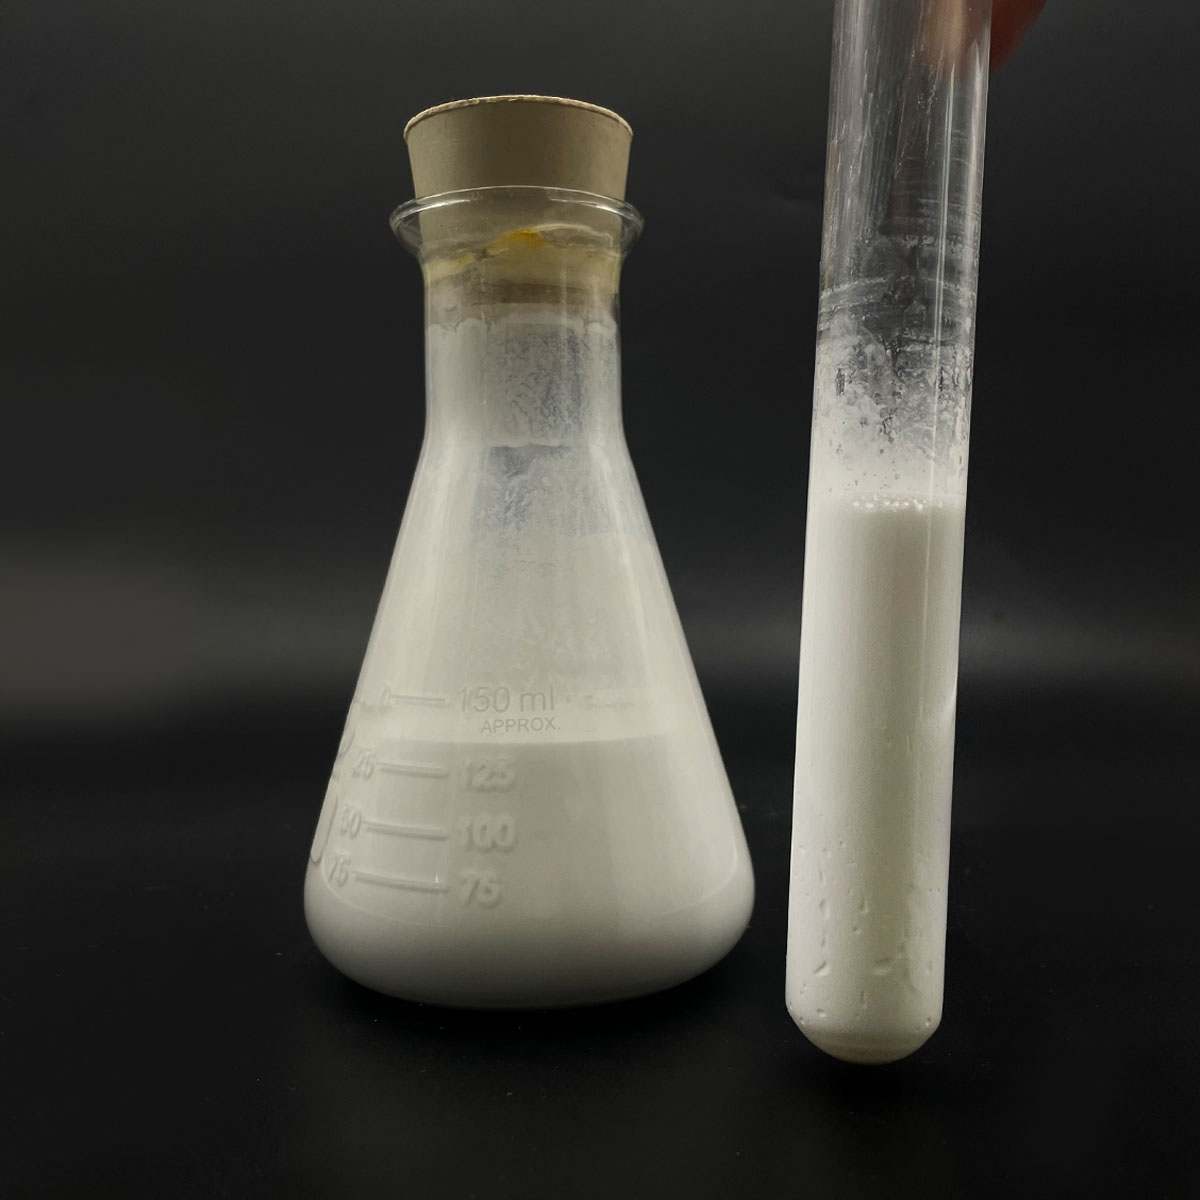 AKD Emulsion/ Wax/ Paper Sizing/ Water resistance/ Cationic/ Chemicals 